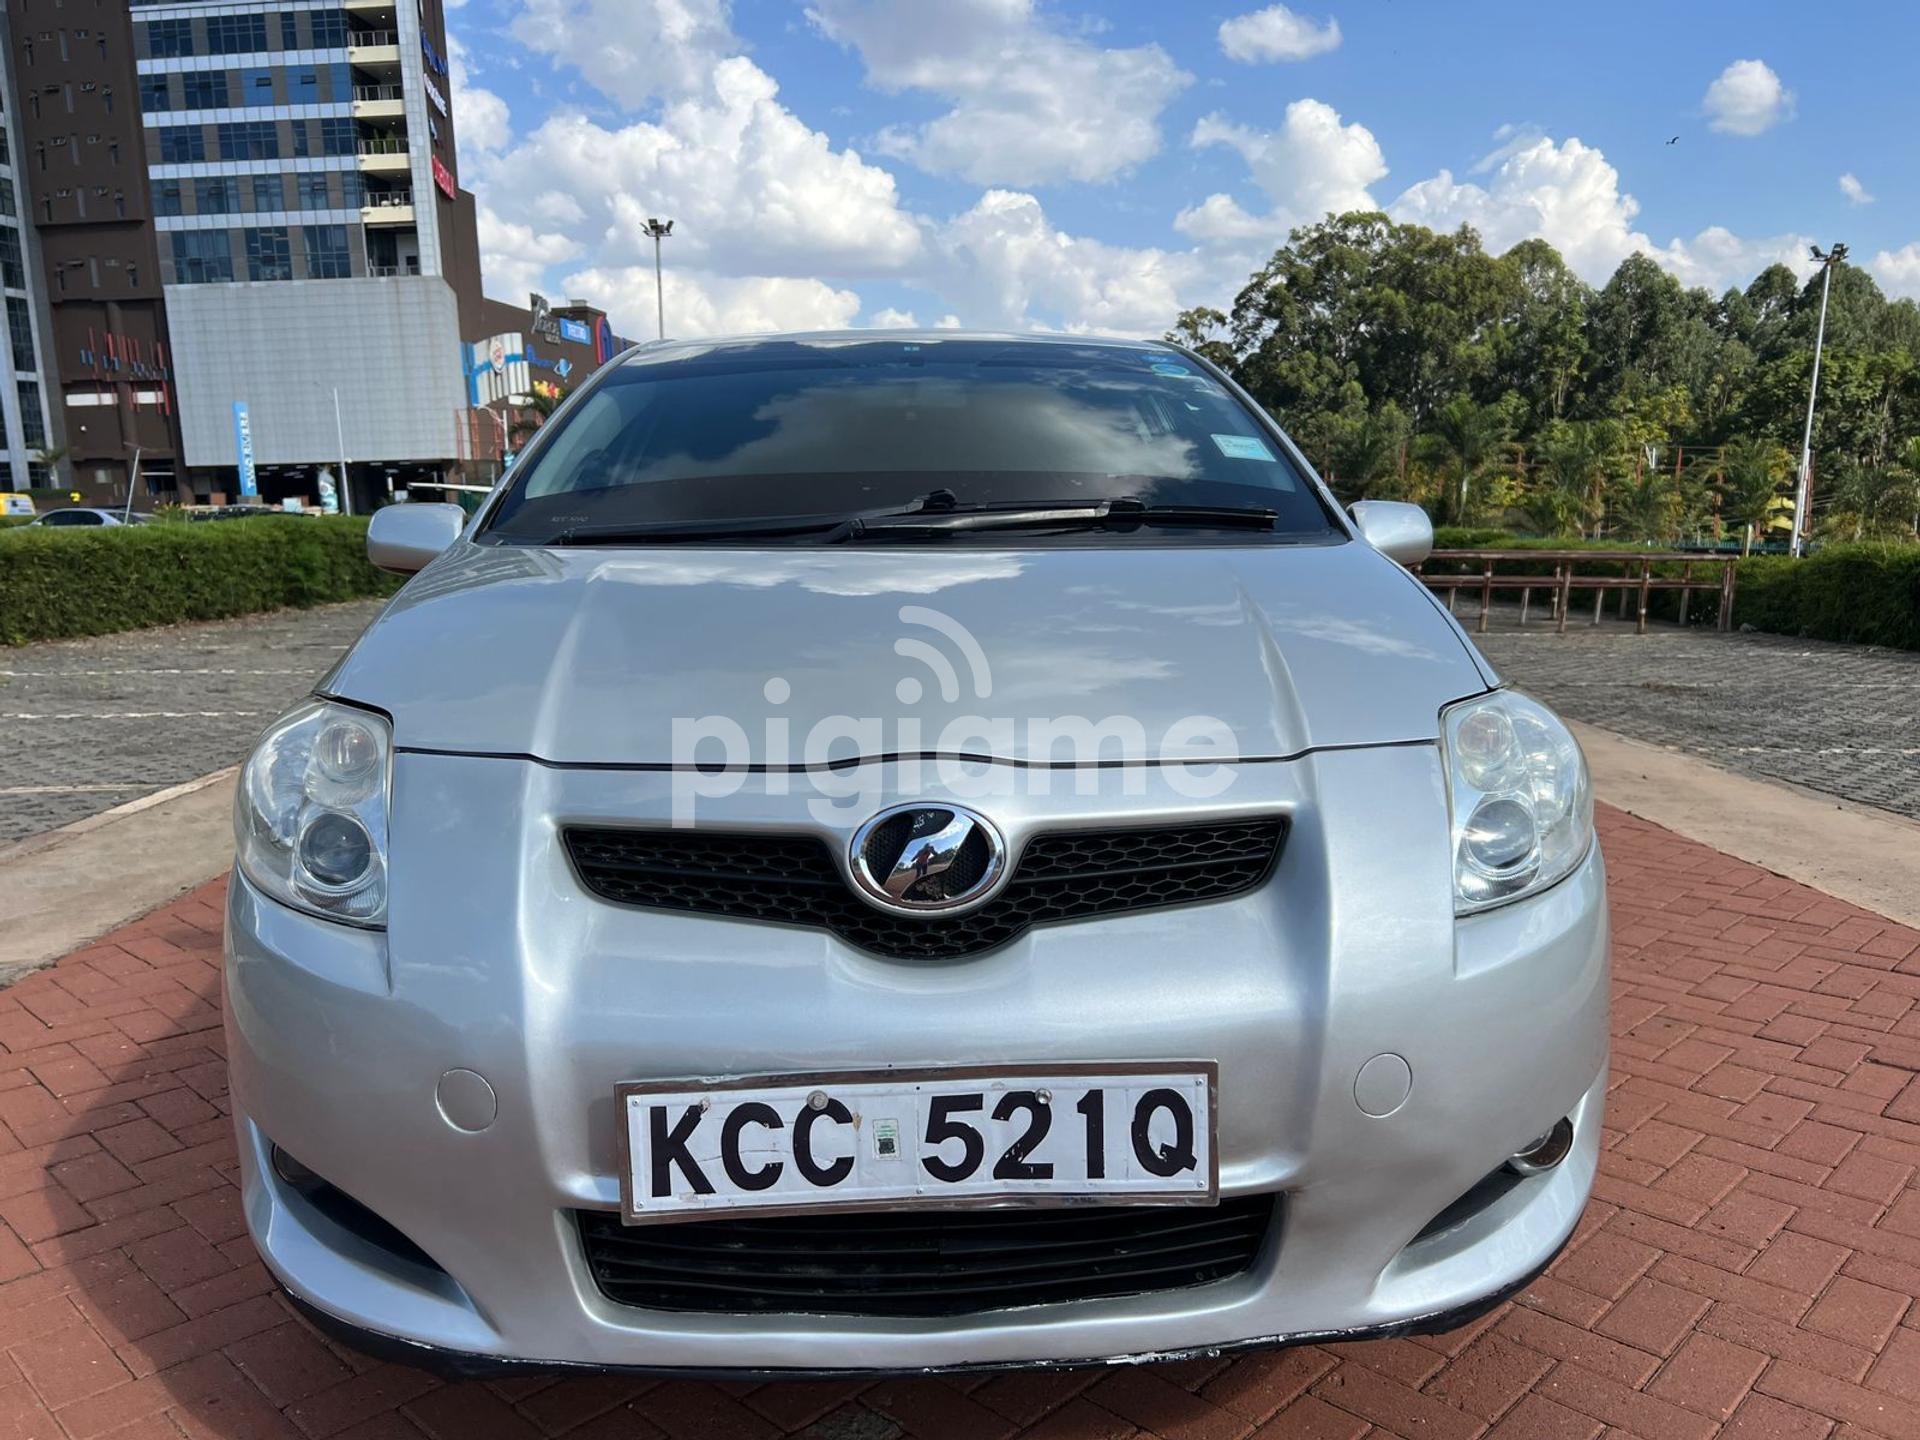 Used Toyota Auris Cars For Sale in Nairobi ▷ Best Prices